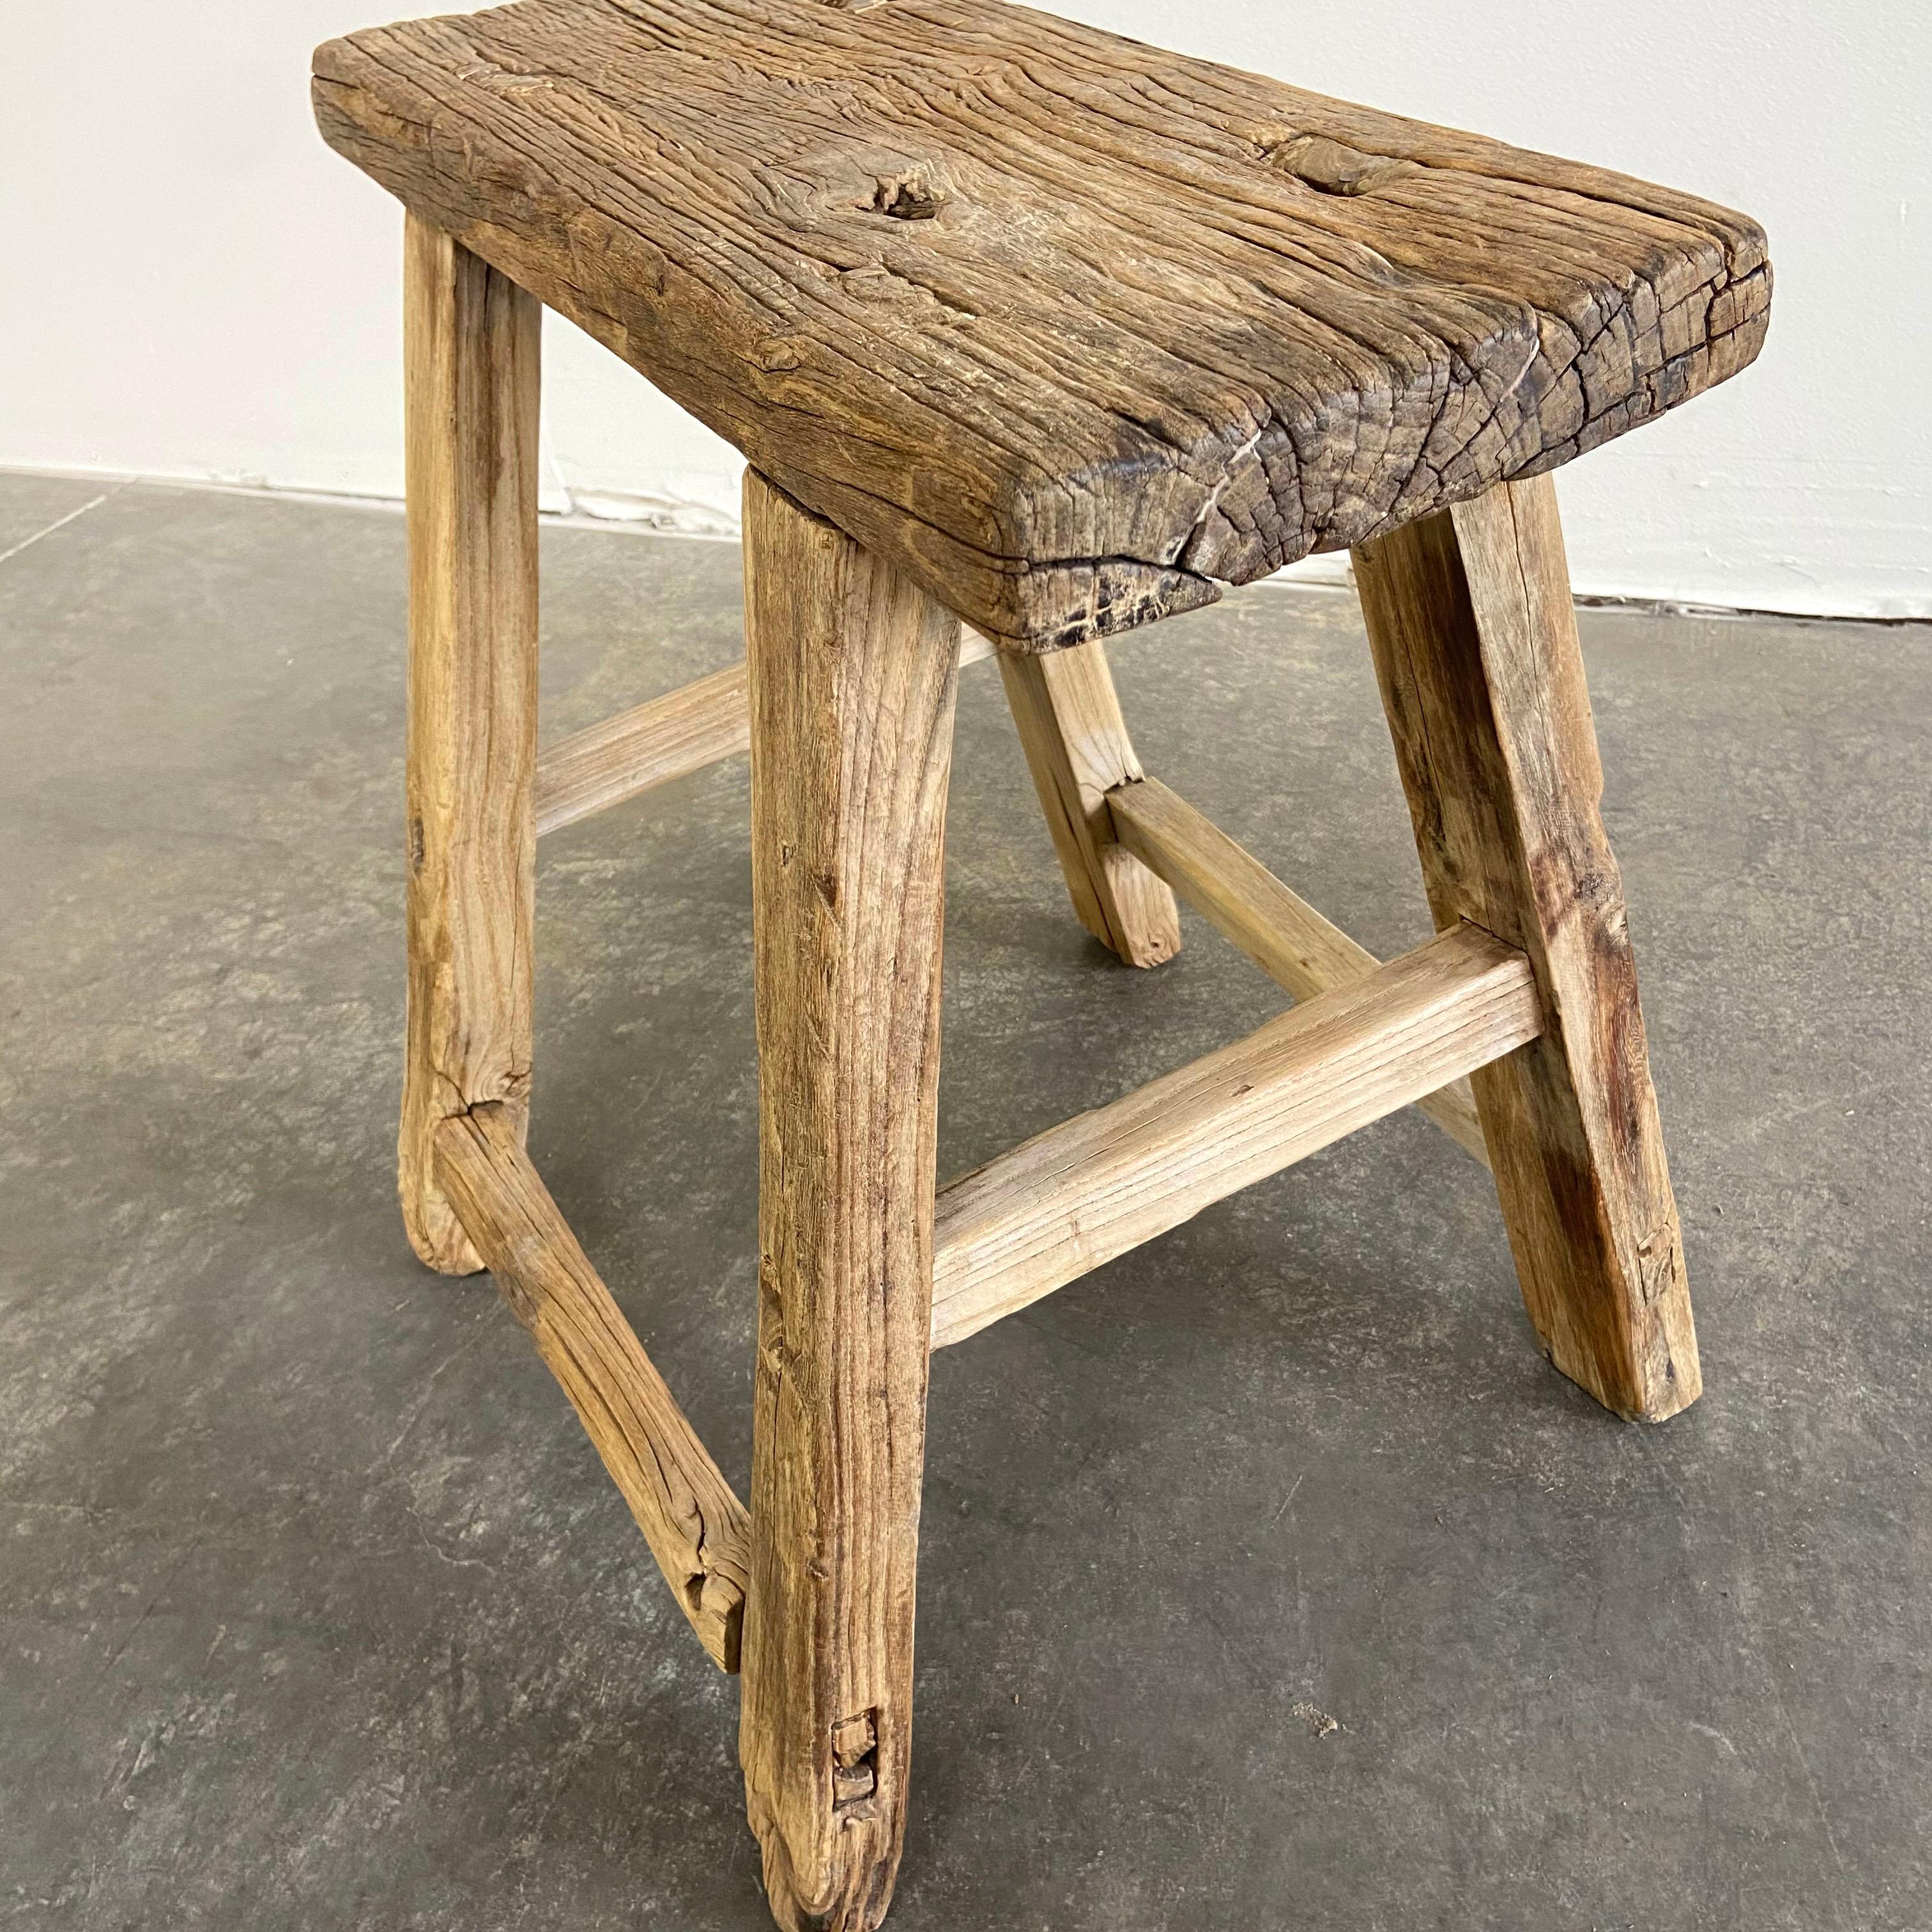 Antique stool / vintage antique elm wood stool
These are the real vintage antique elm wood stools! Beautiful antique patina, with weathering and age, these are solid and sturdy ready for daily use, use as a table, stool, drink table, they are great